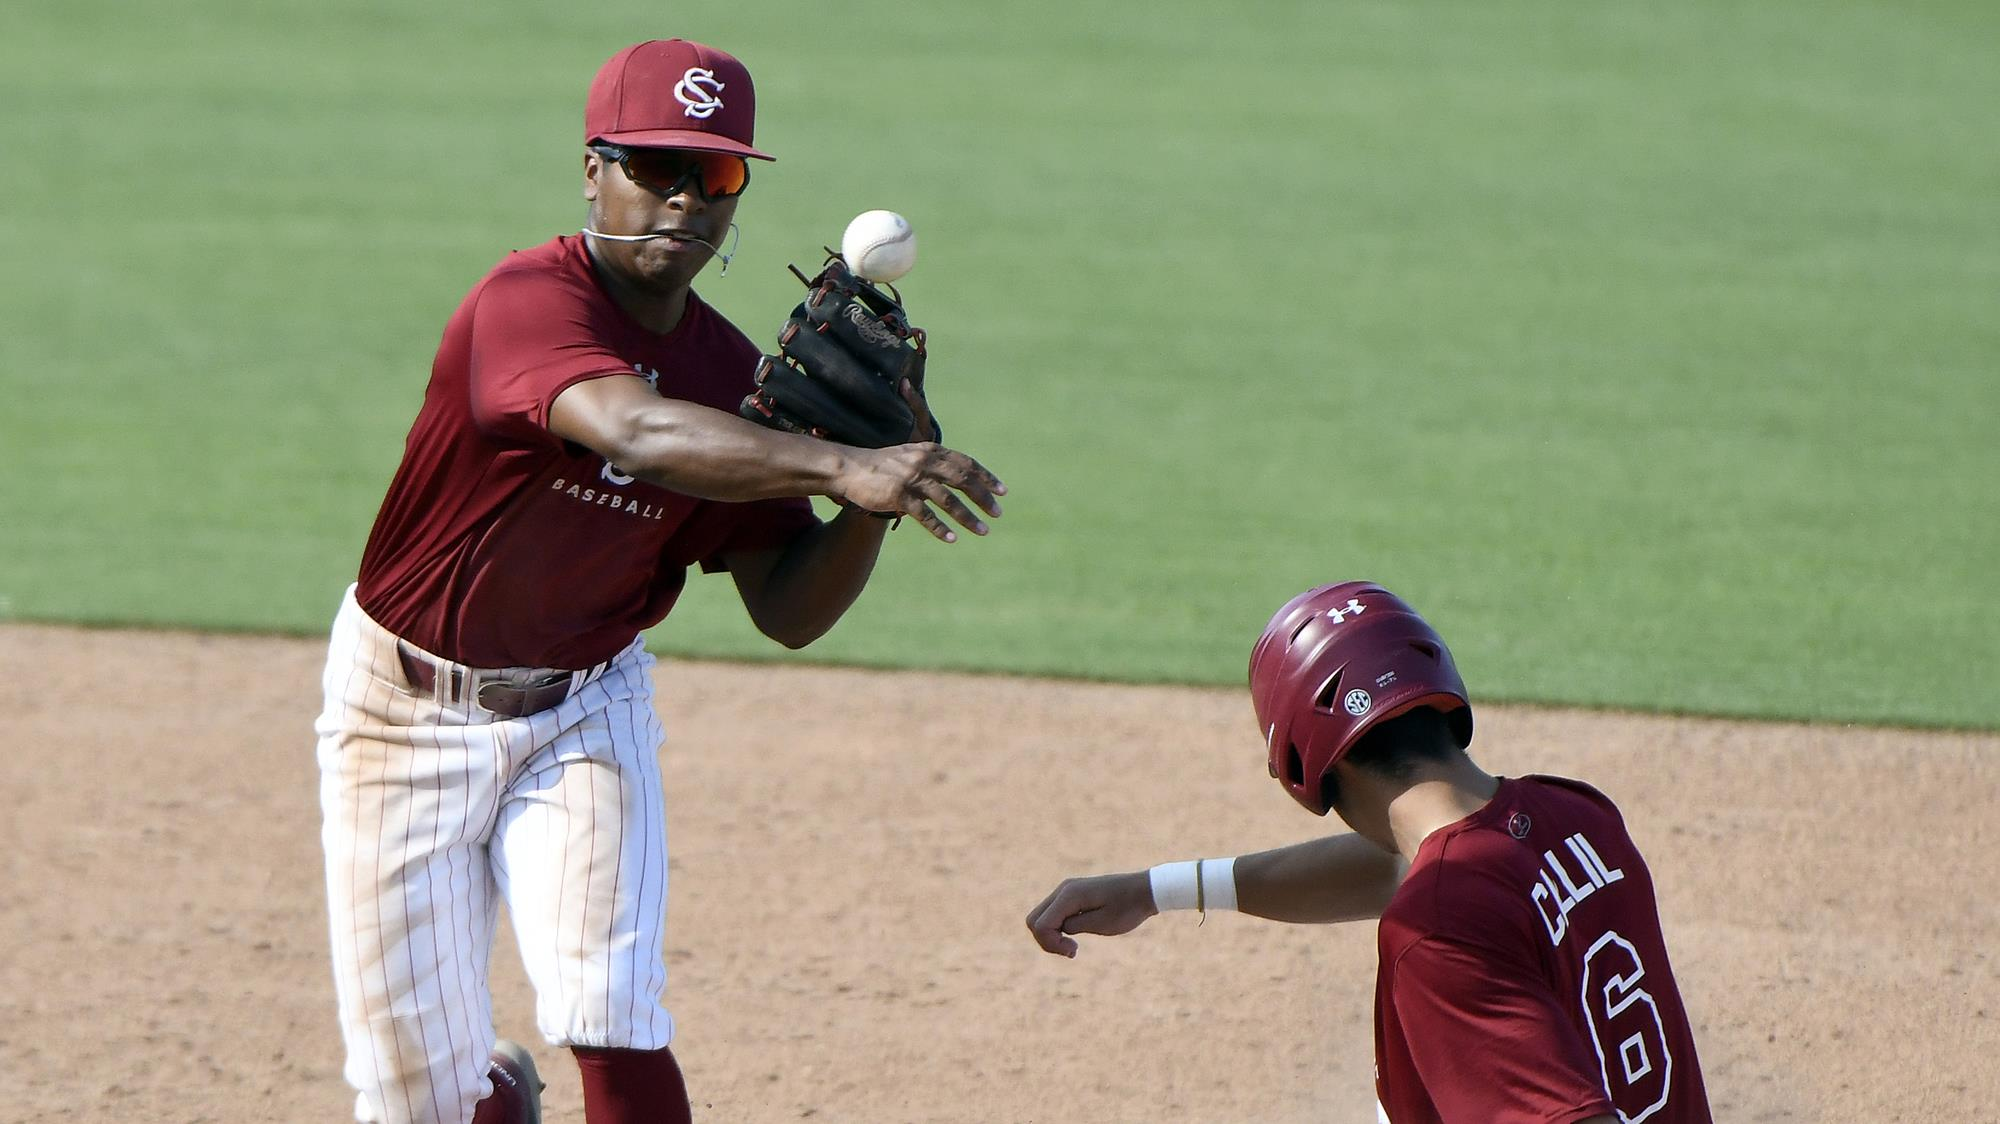 TIME CHANGE: Baseball Heads to Raleigh for Sunday Scrimmage vs. N.C. State